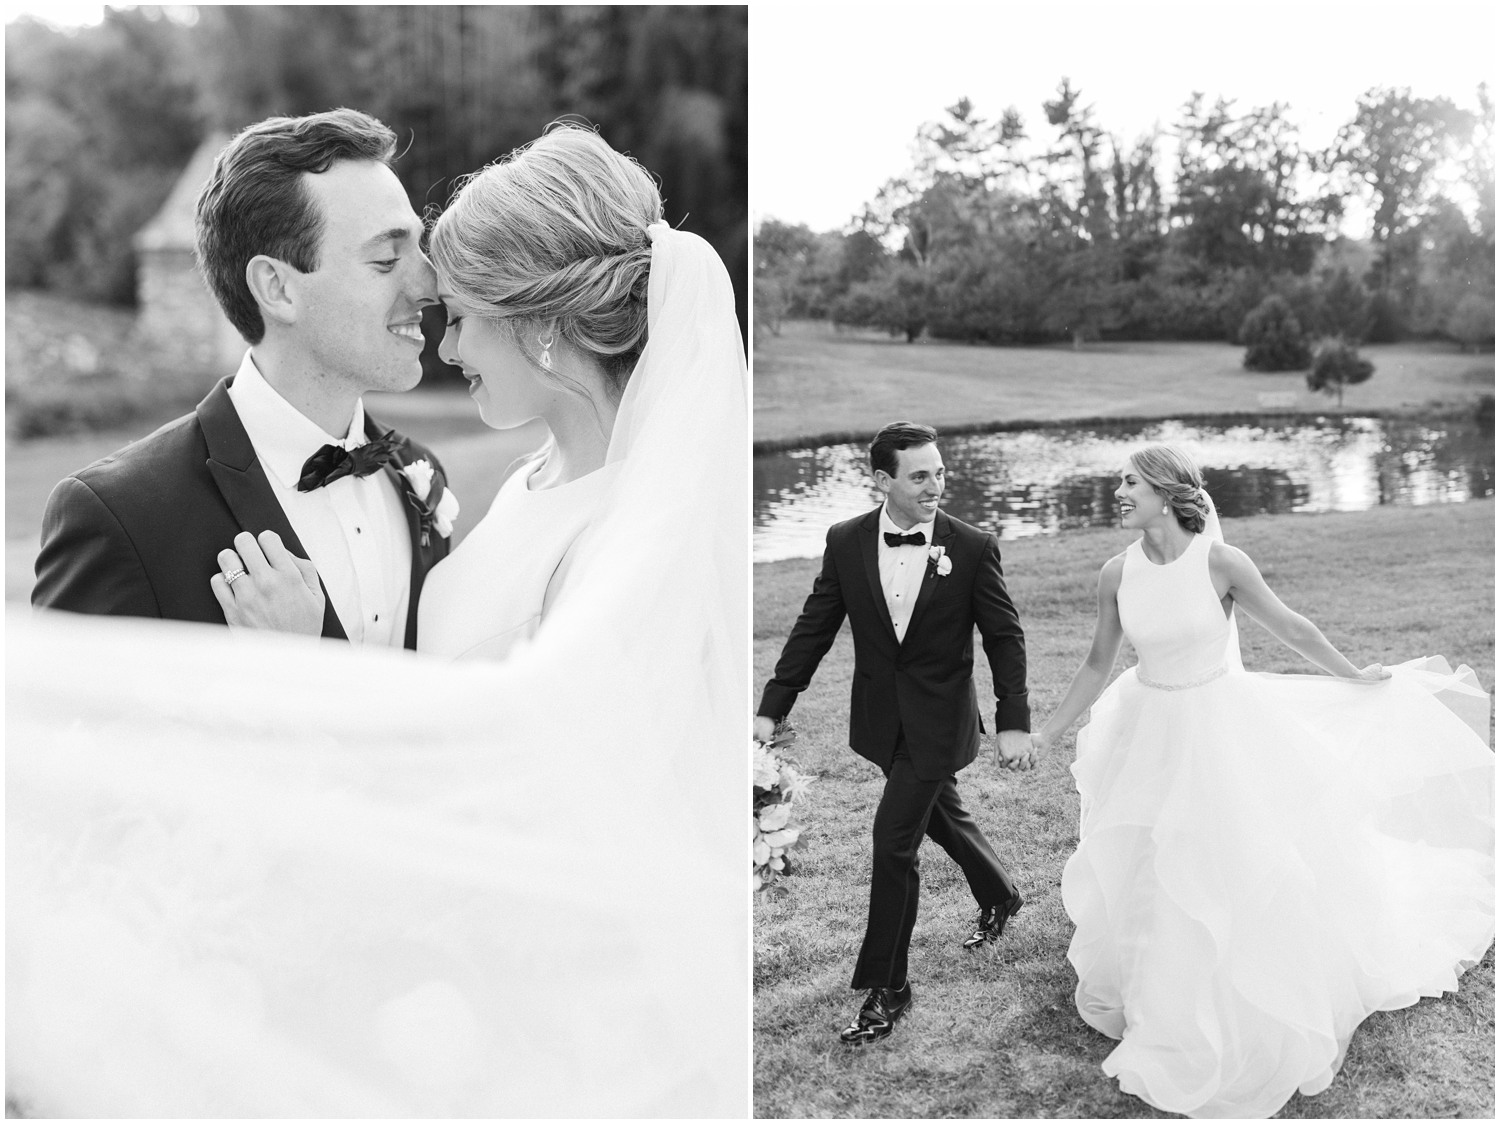 classic black and white portraits of bride and groom with bride's veil wrapped around them